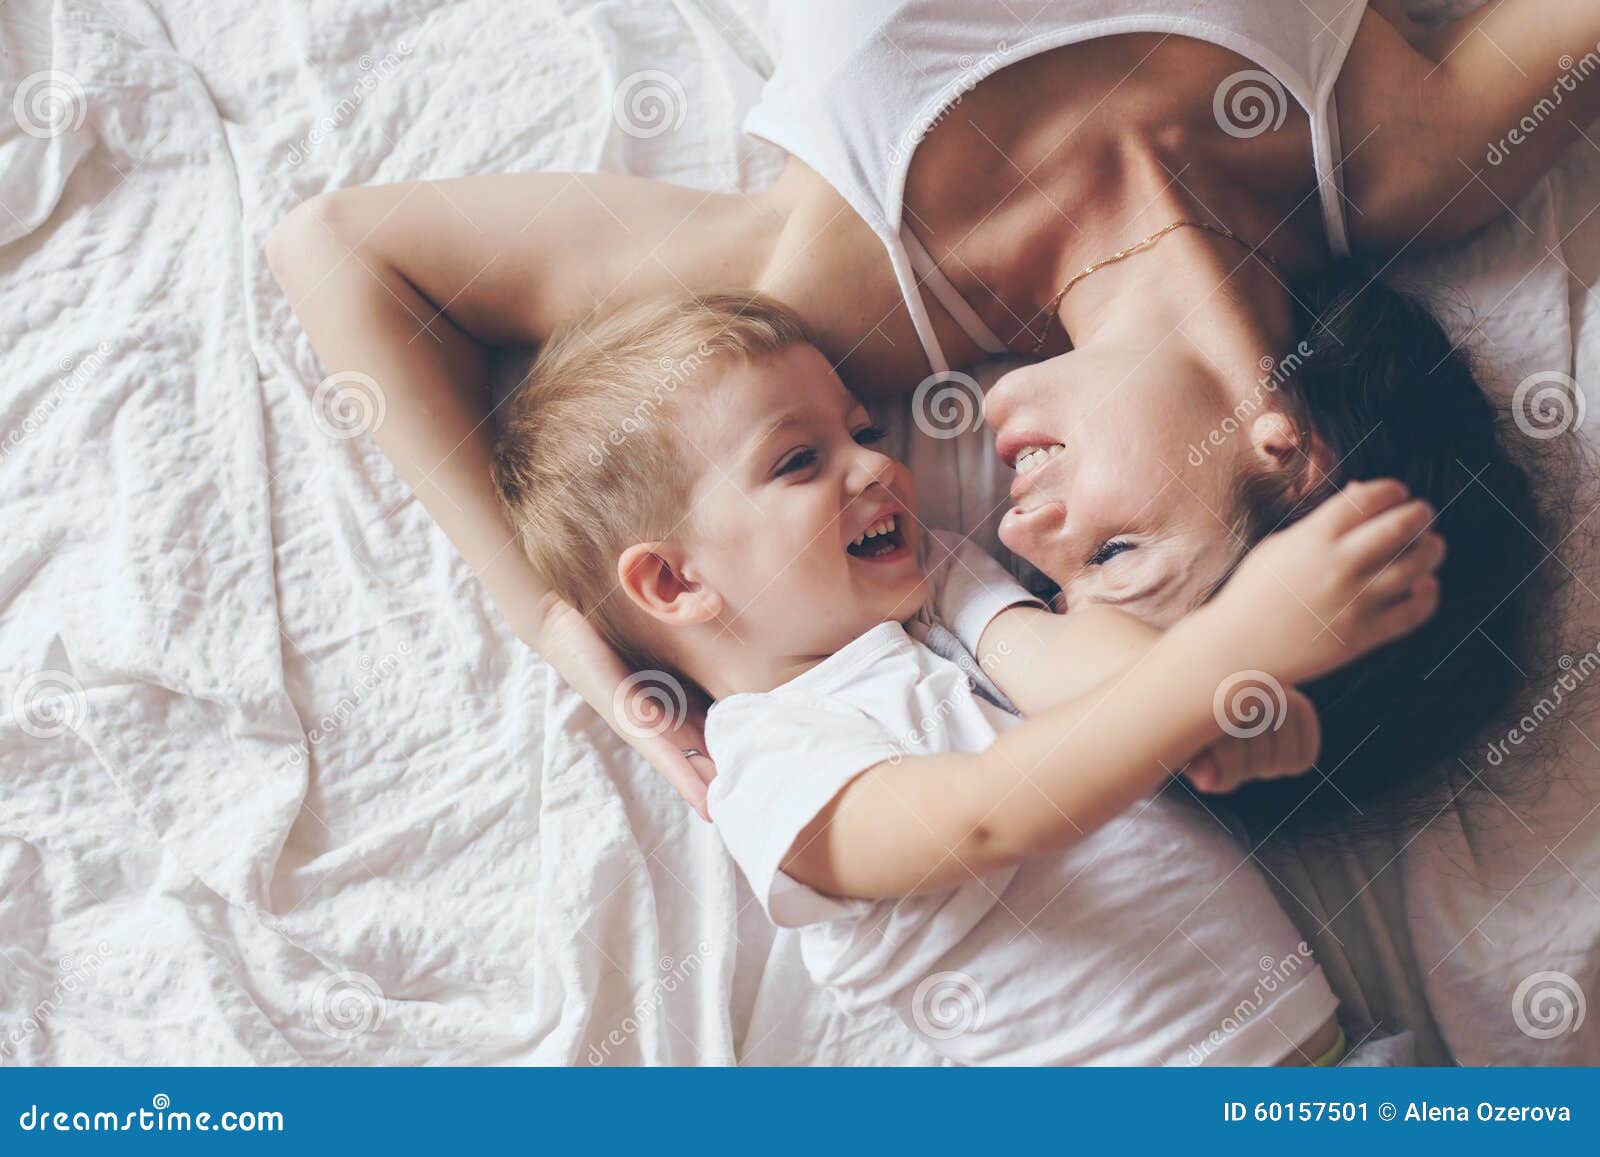 Mom Relaxing With Her Little Son Stock Image Image Of Bedding Still 60157501